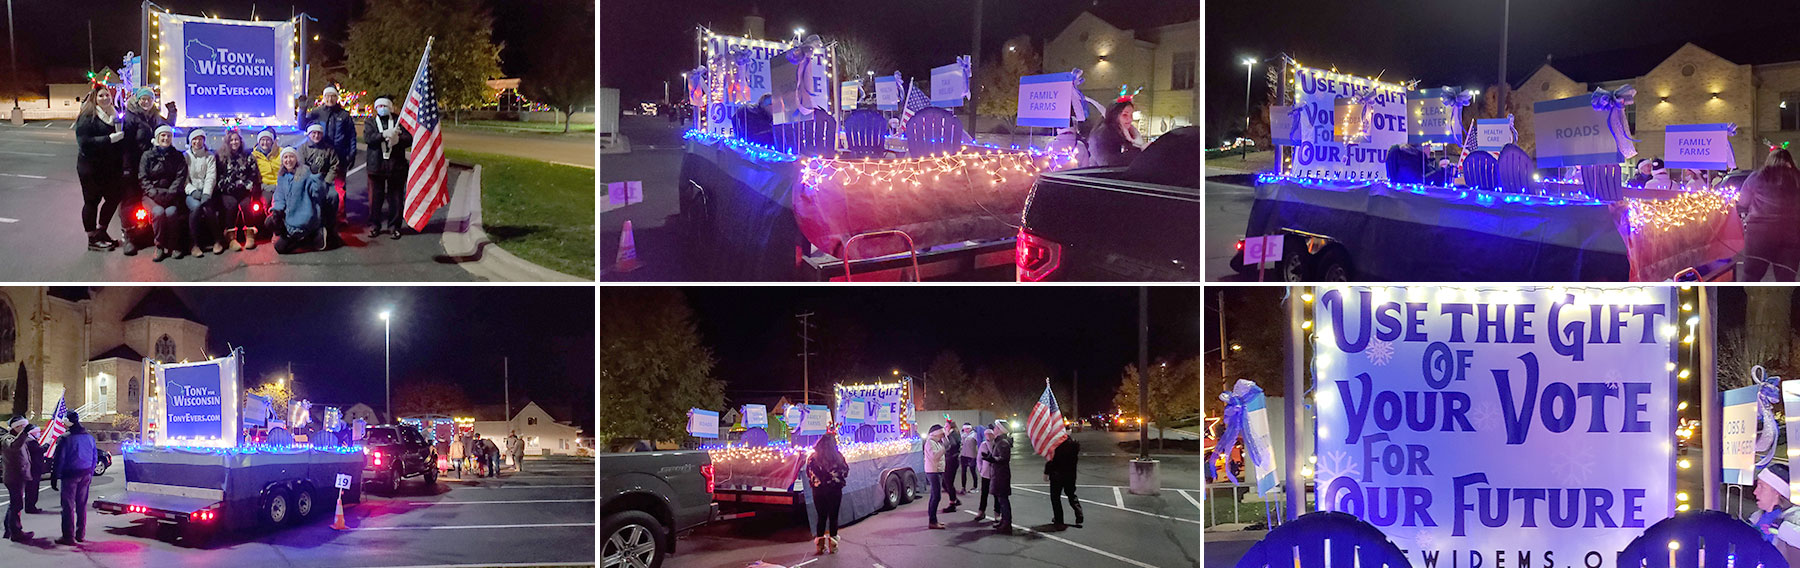 Fort Atkinson Holiday Parade Photos Democratic Party of Jefferson